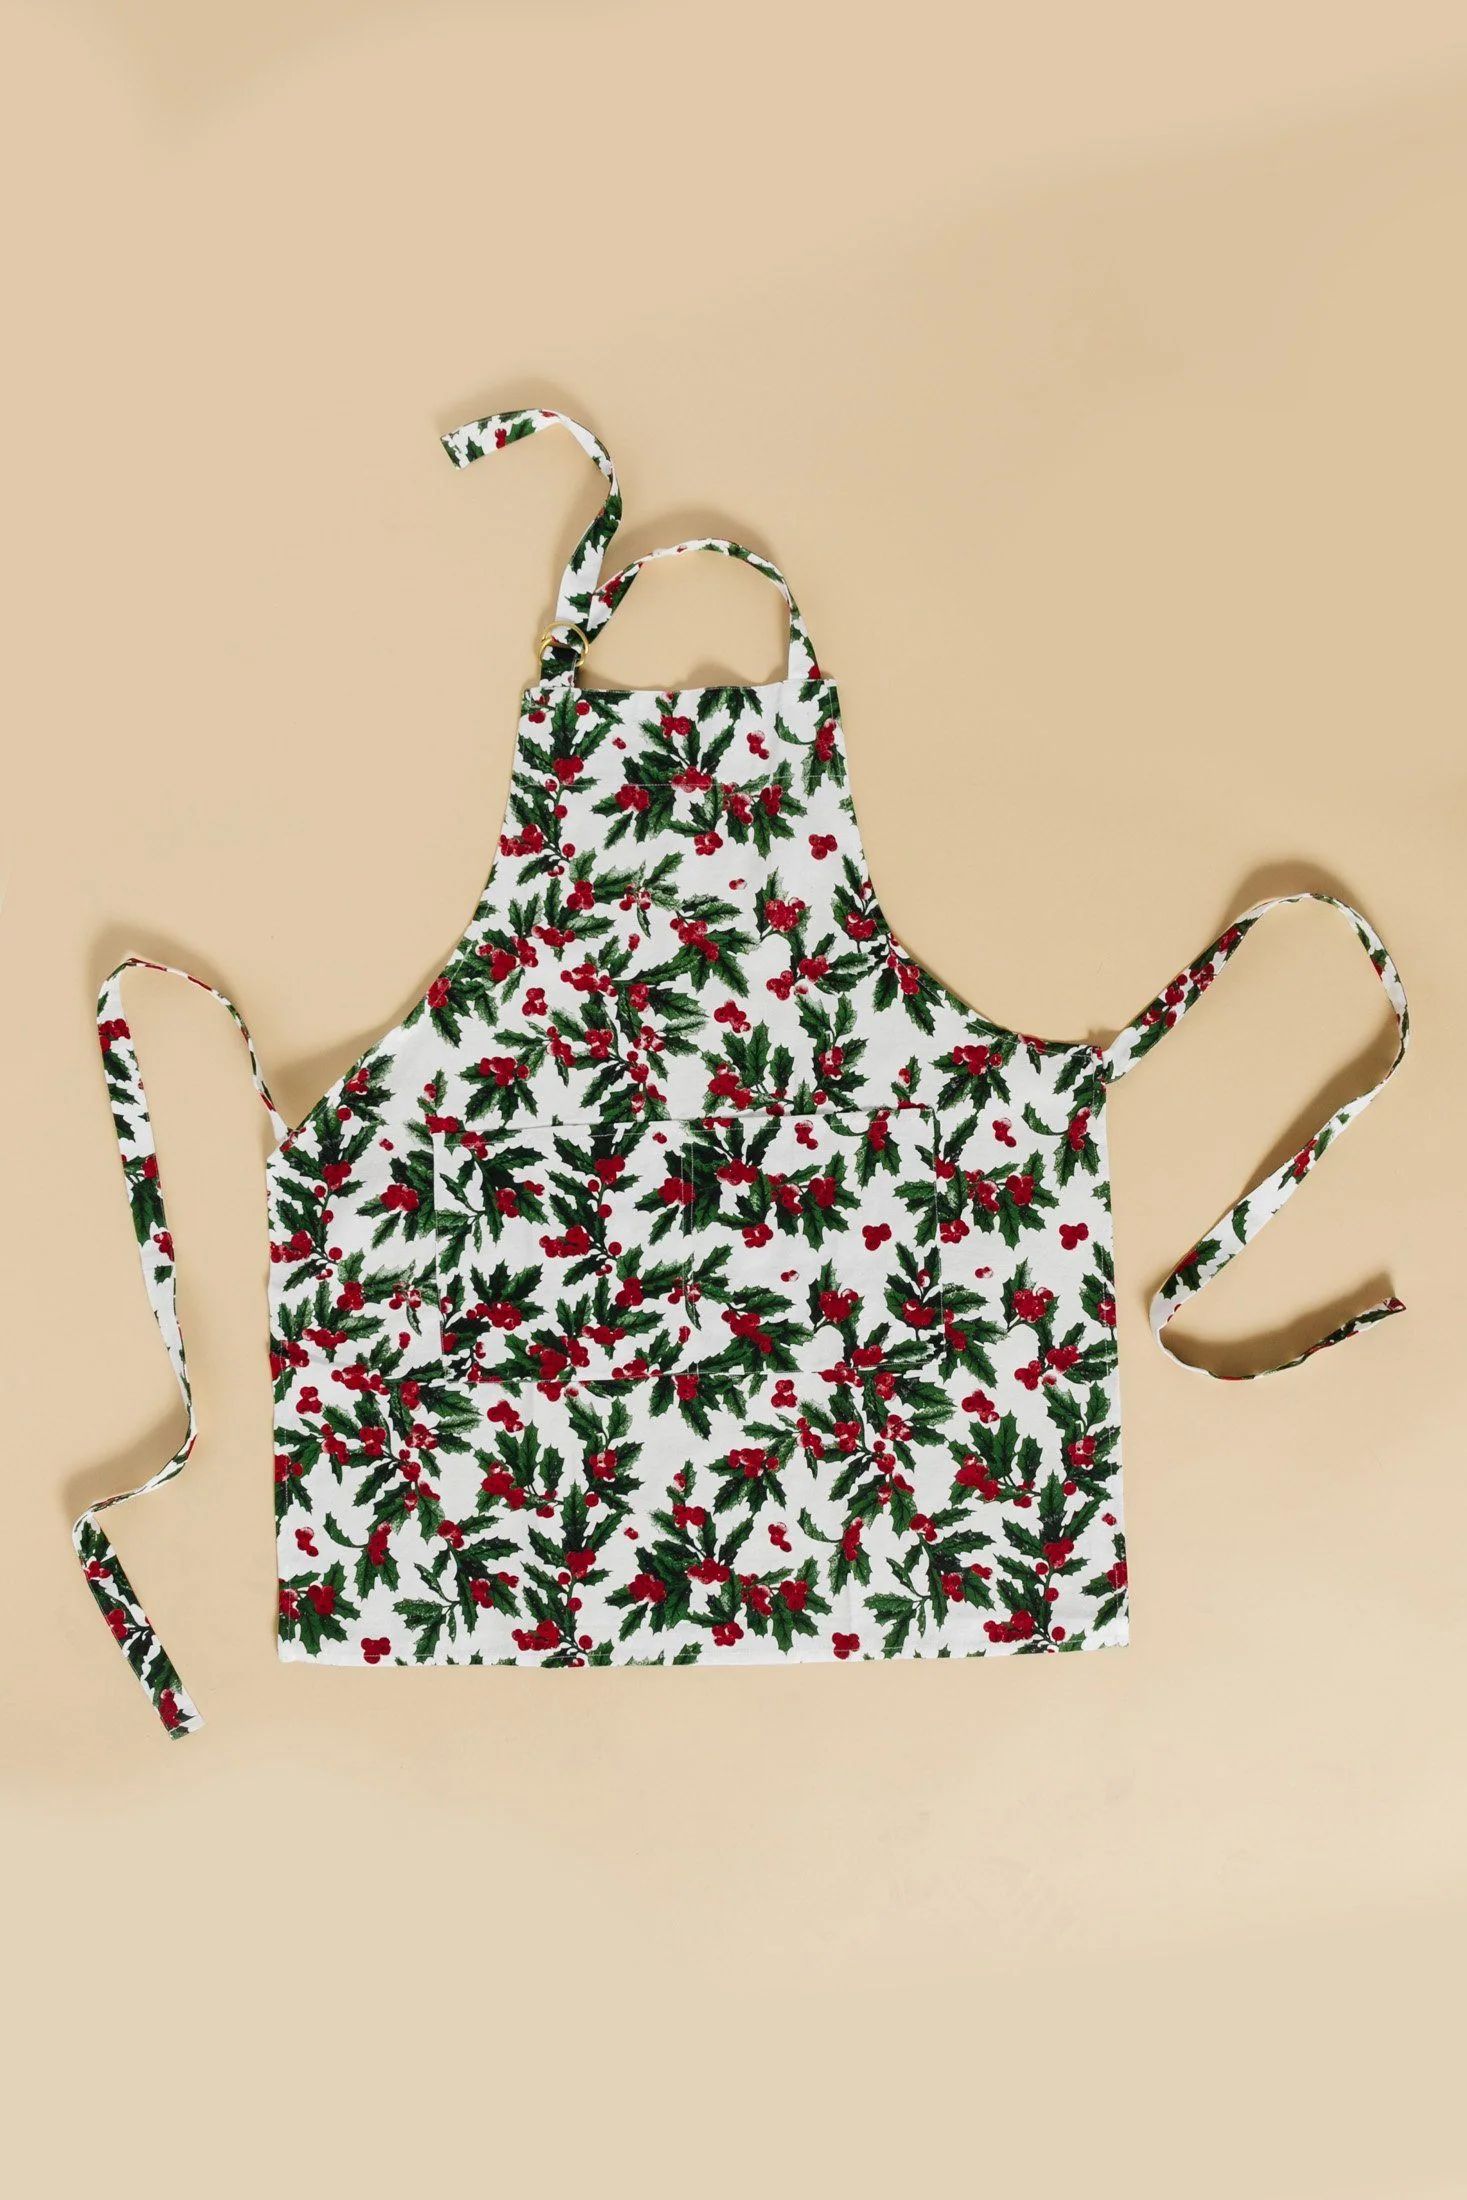 Apron - Holly Berries | Rachel Parcell